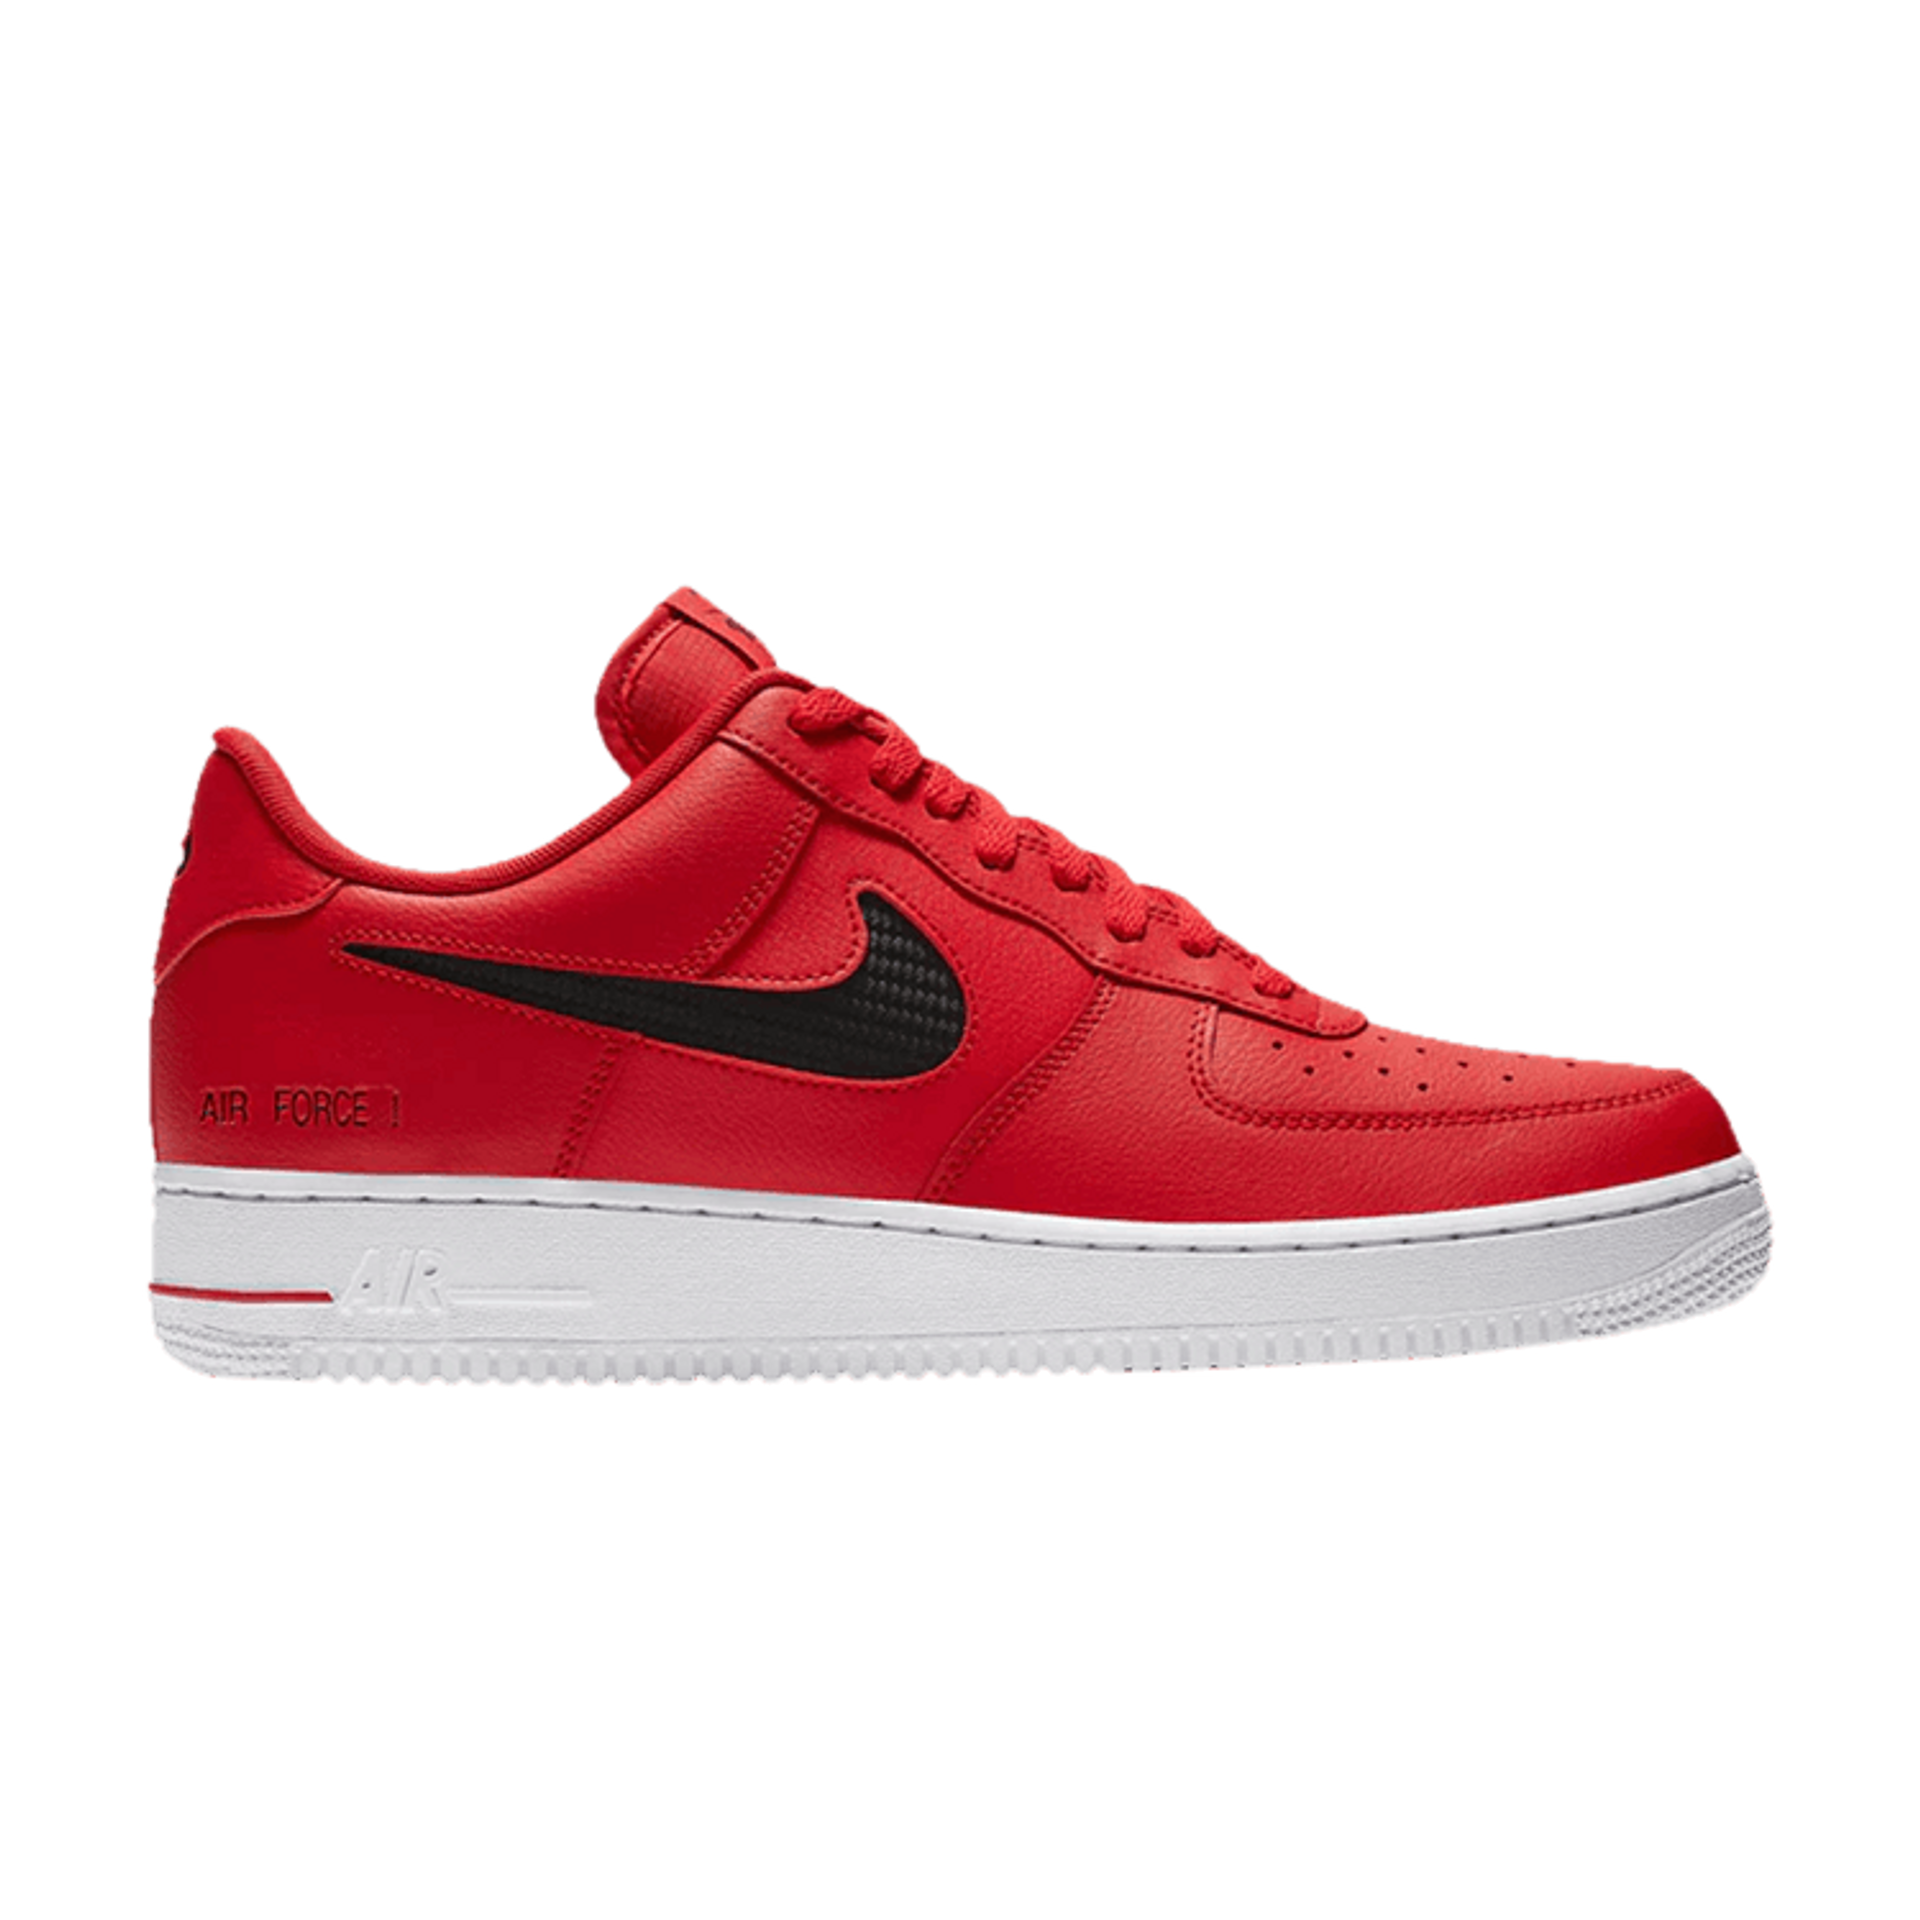 Air Force 1 '07 LV8 'Cut Out Swoosh - University Red'